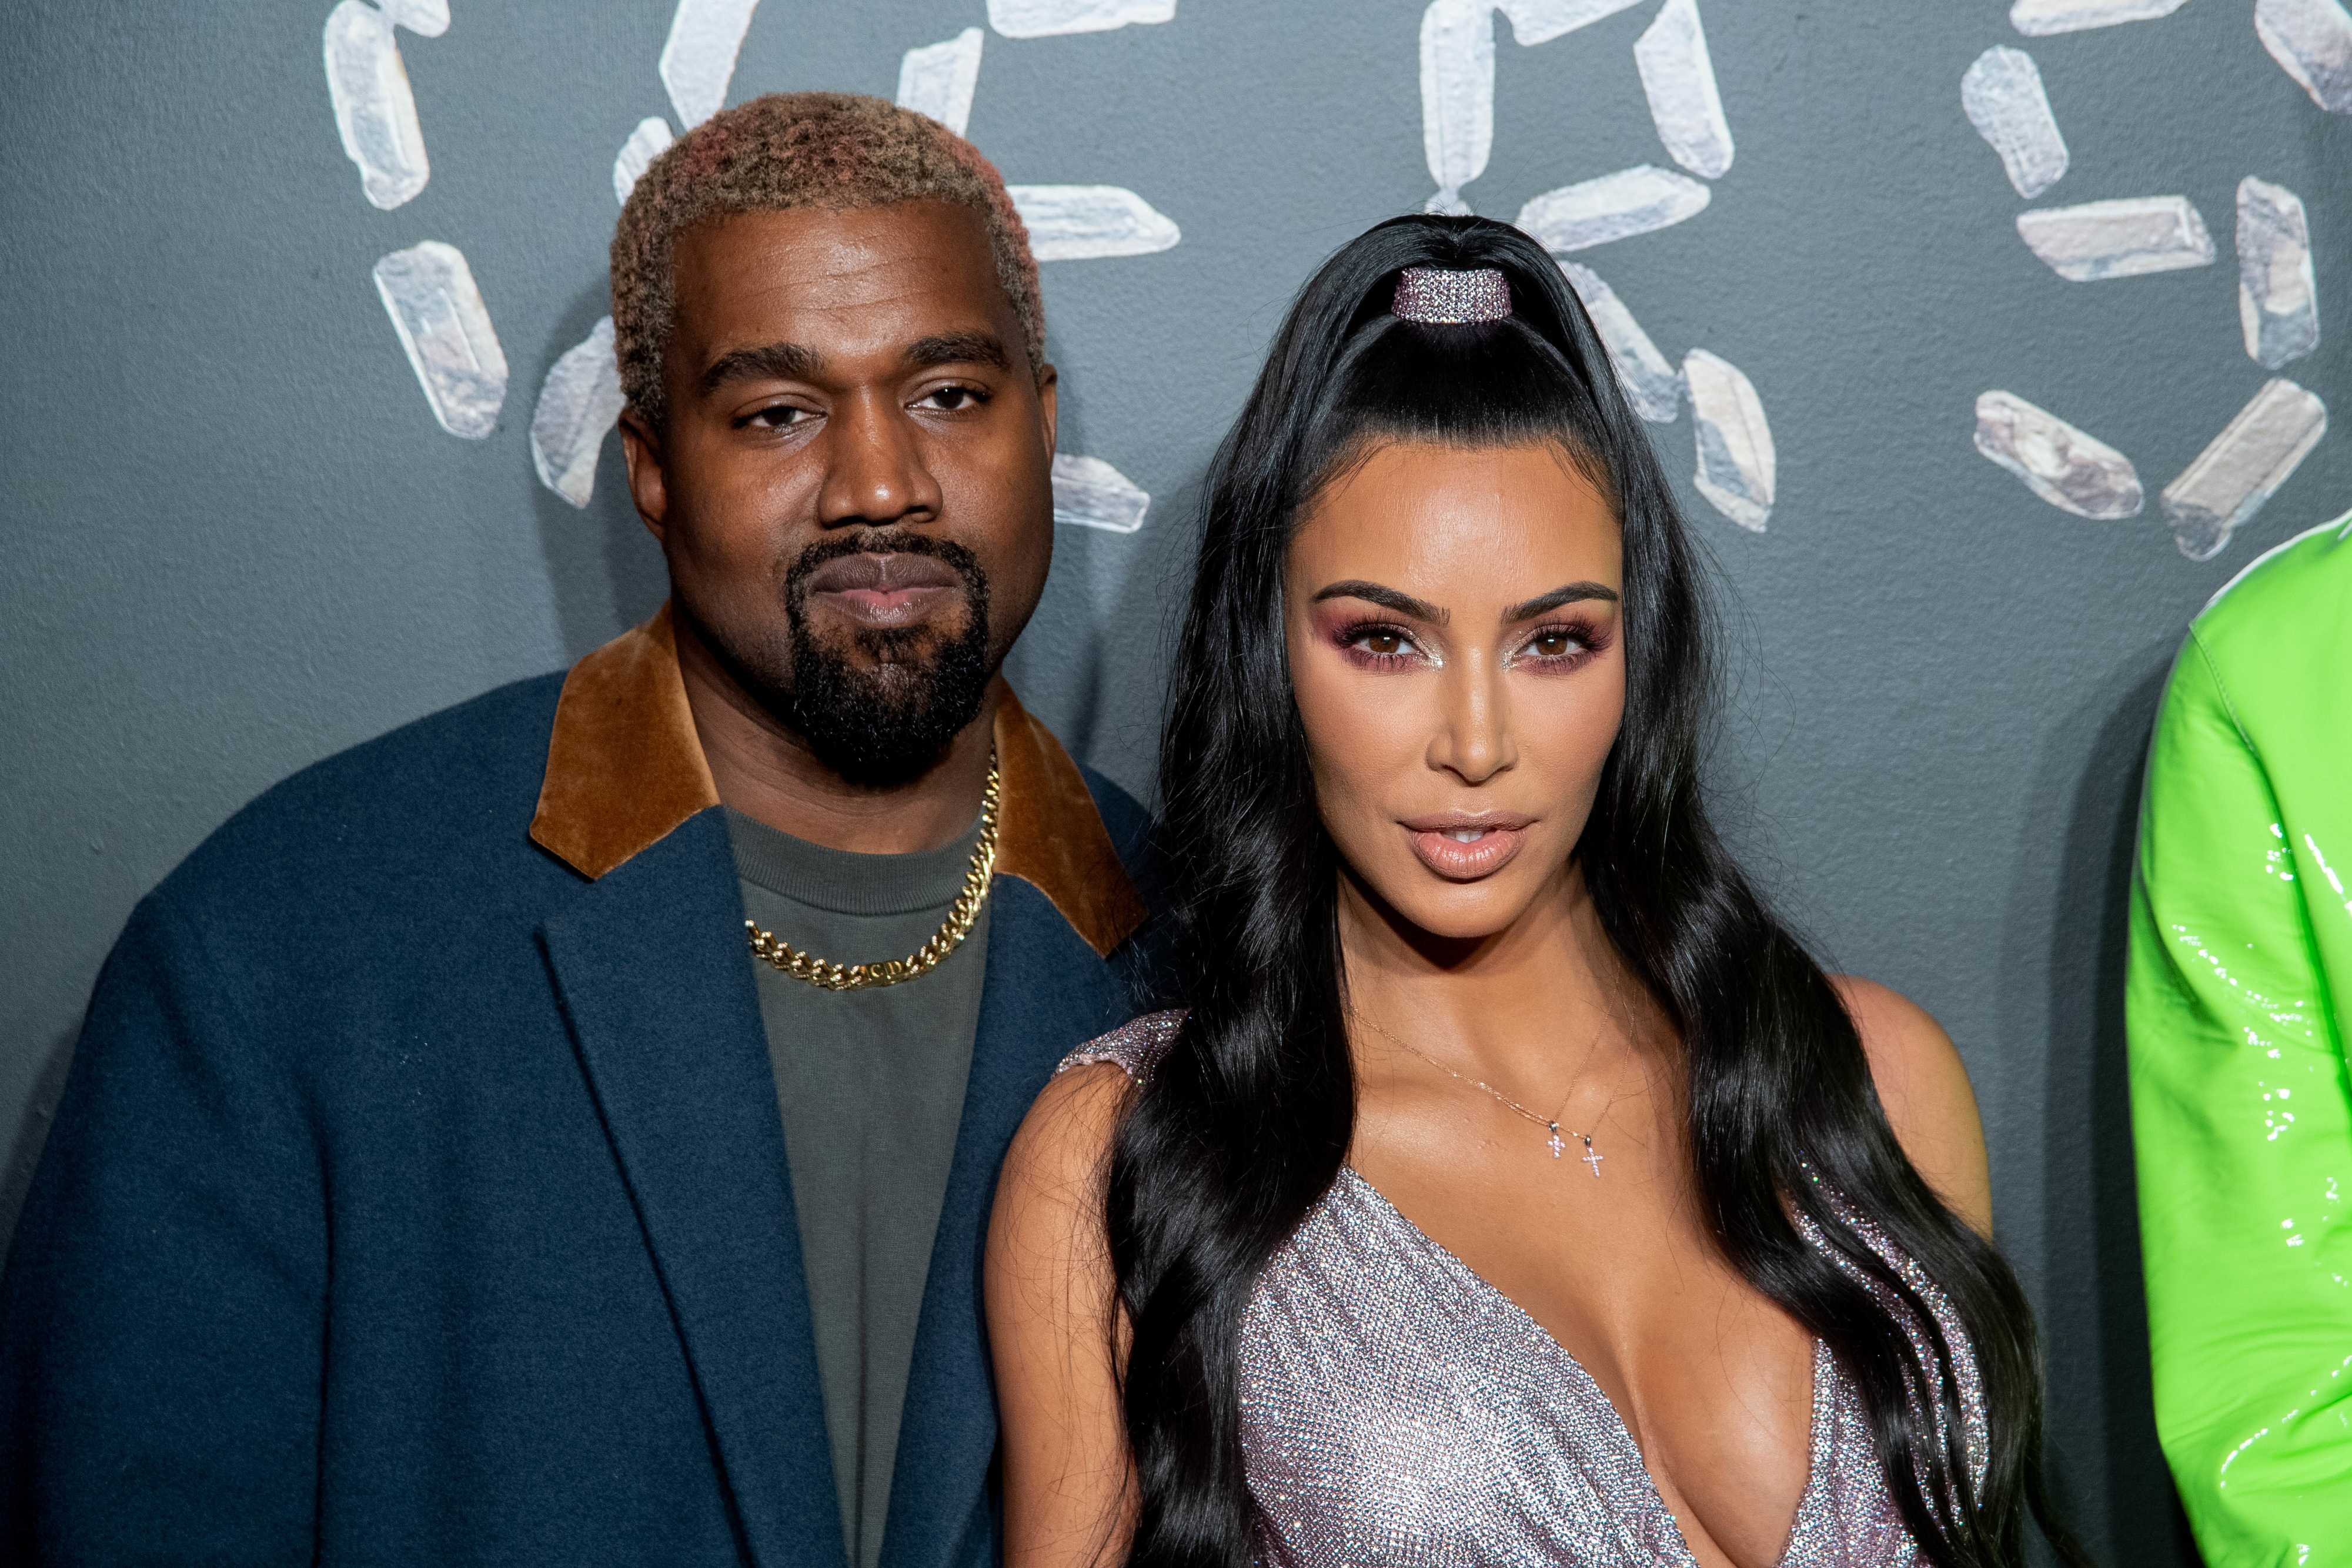 Close-up of Kim and Ye at a press event